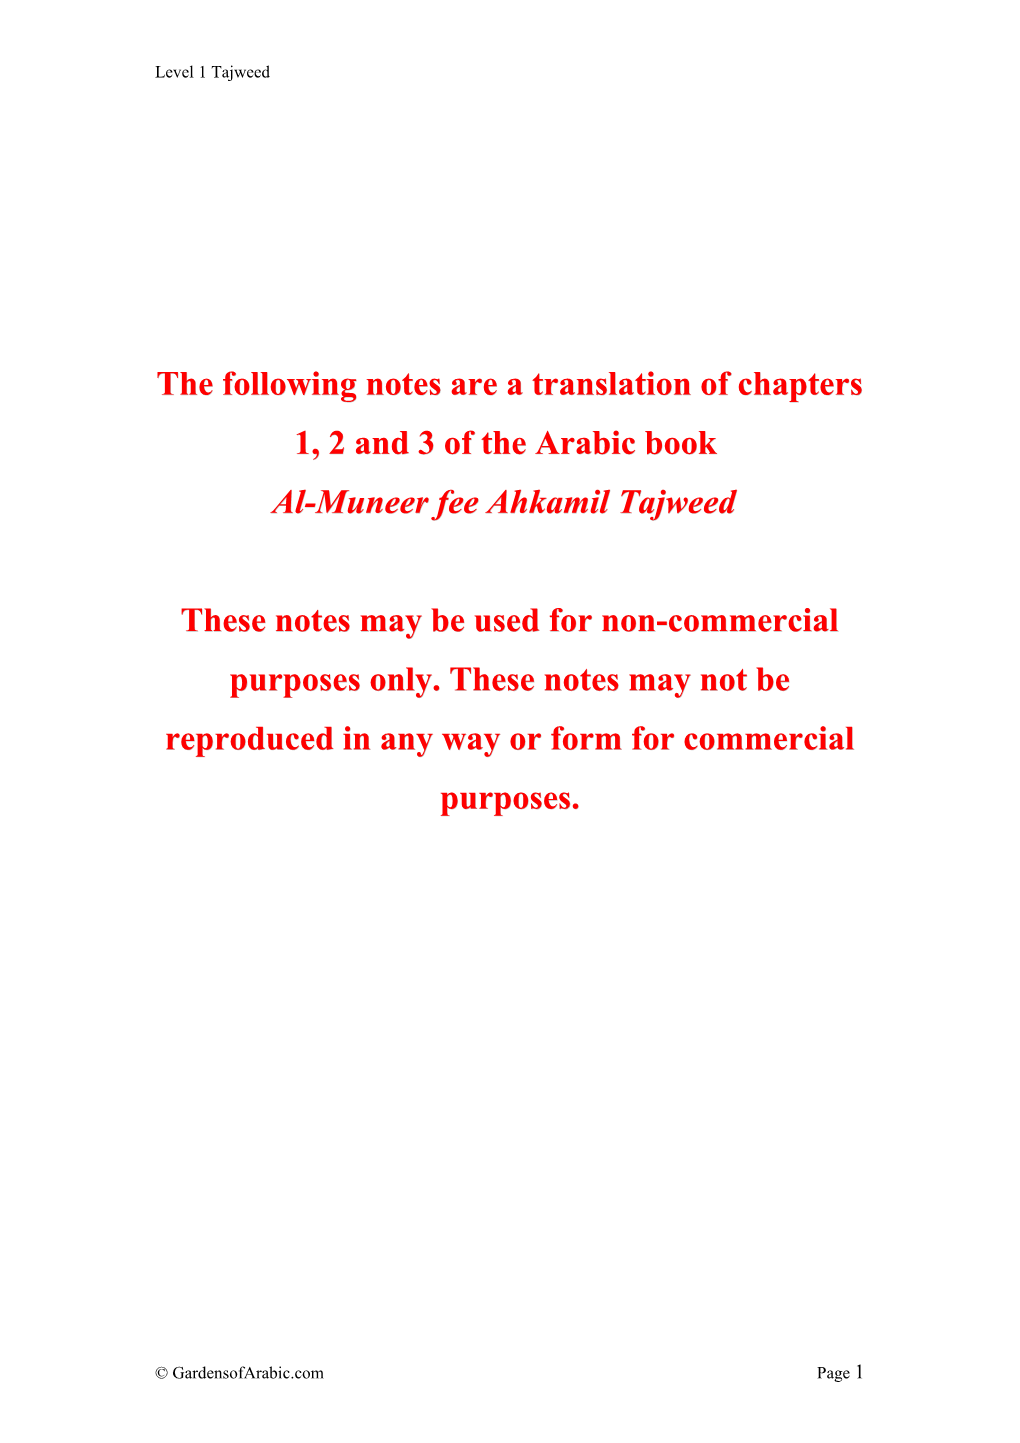 The Following Notes Are a Translation of Chapters 1, 2 and 3 of the Arabic Book